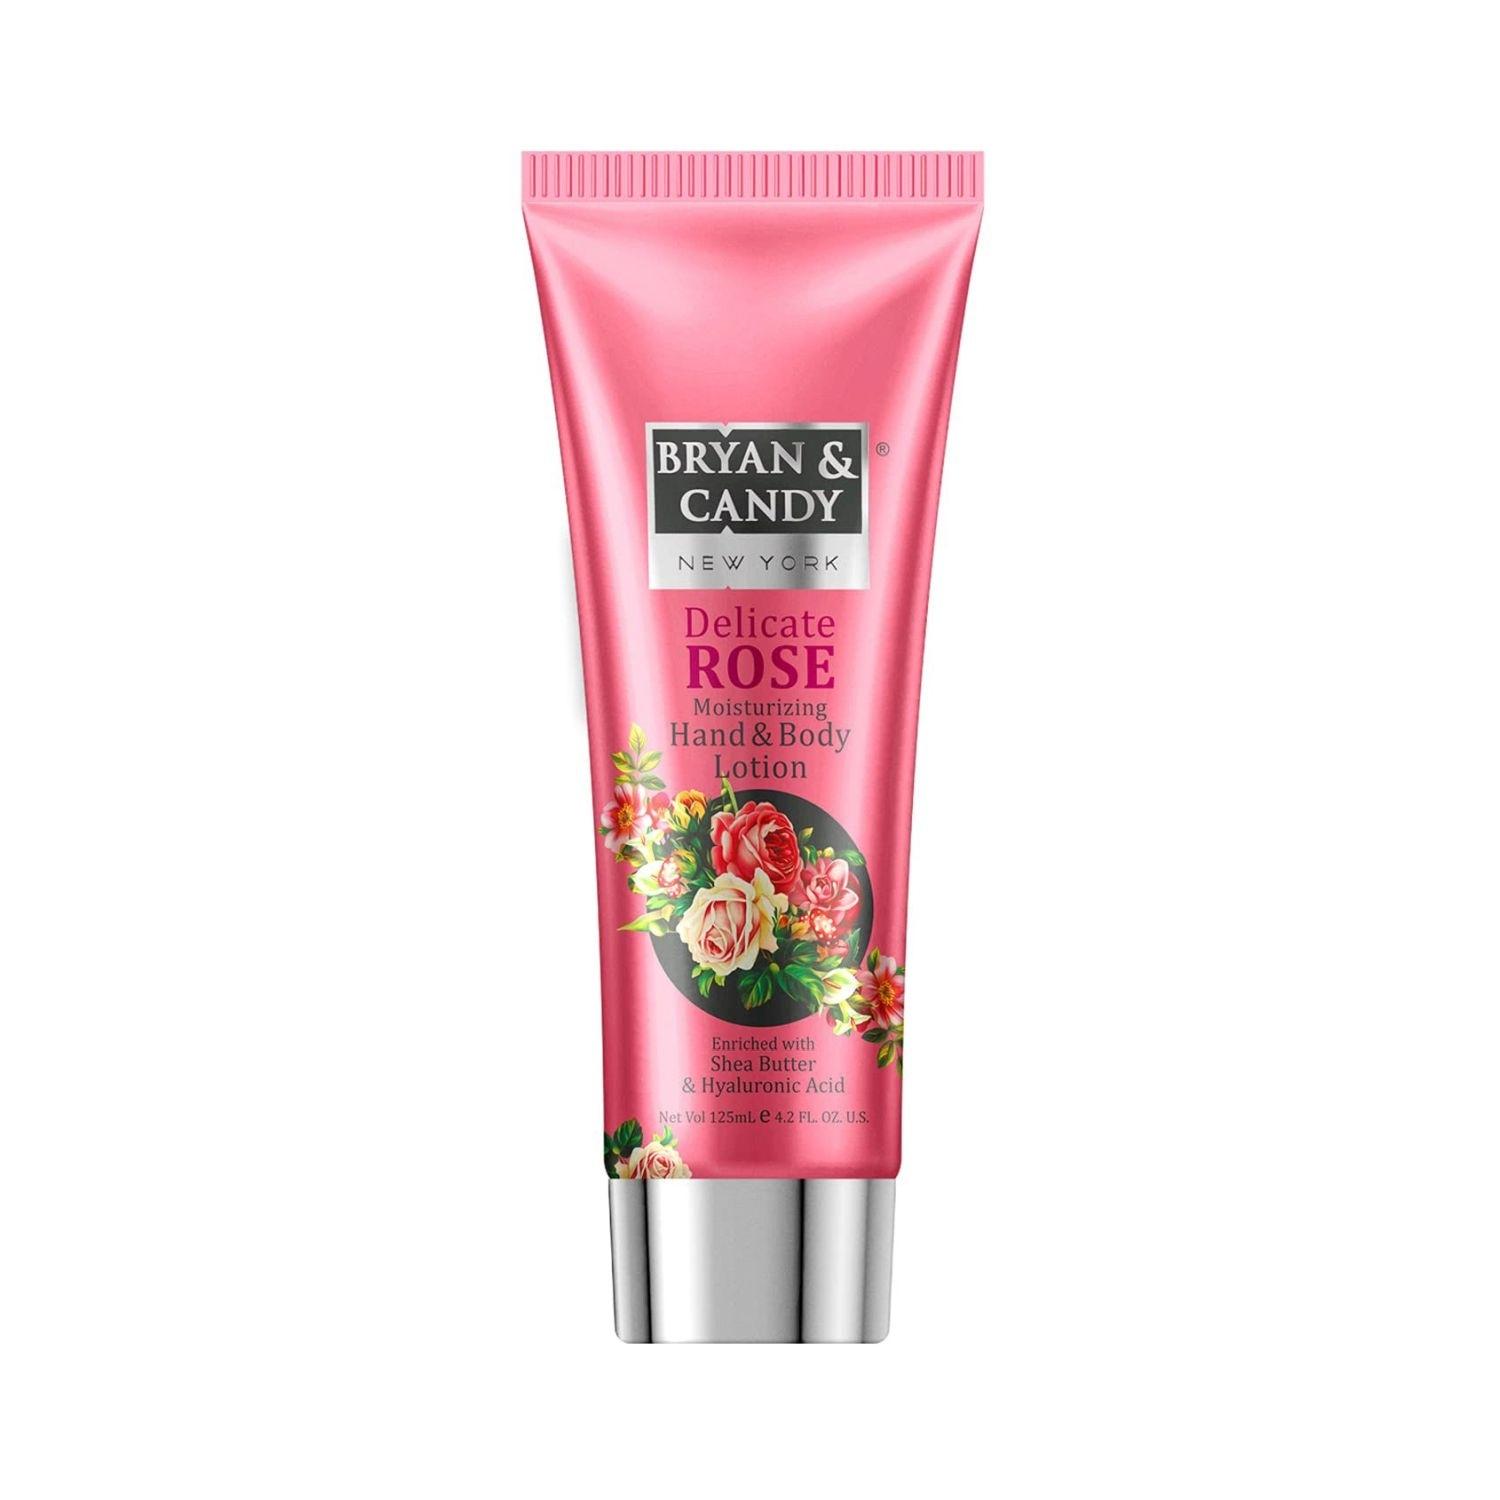 BRYAN & CANDY Delicate Rose Hand & Body Lotion (125ml)